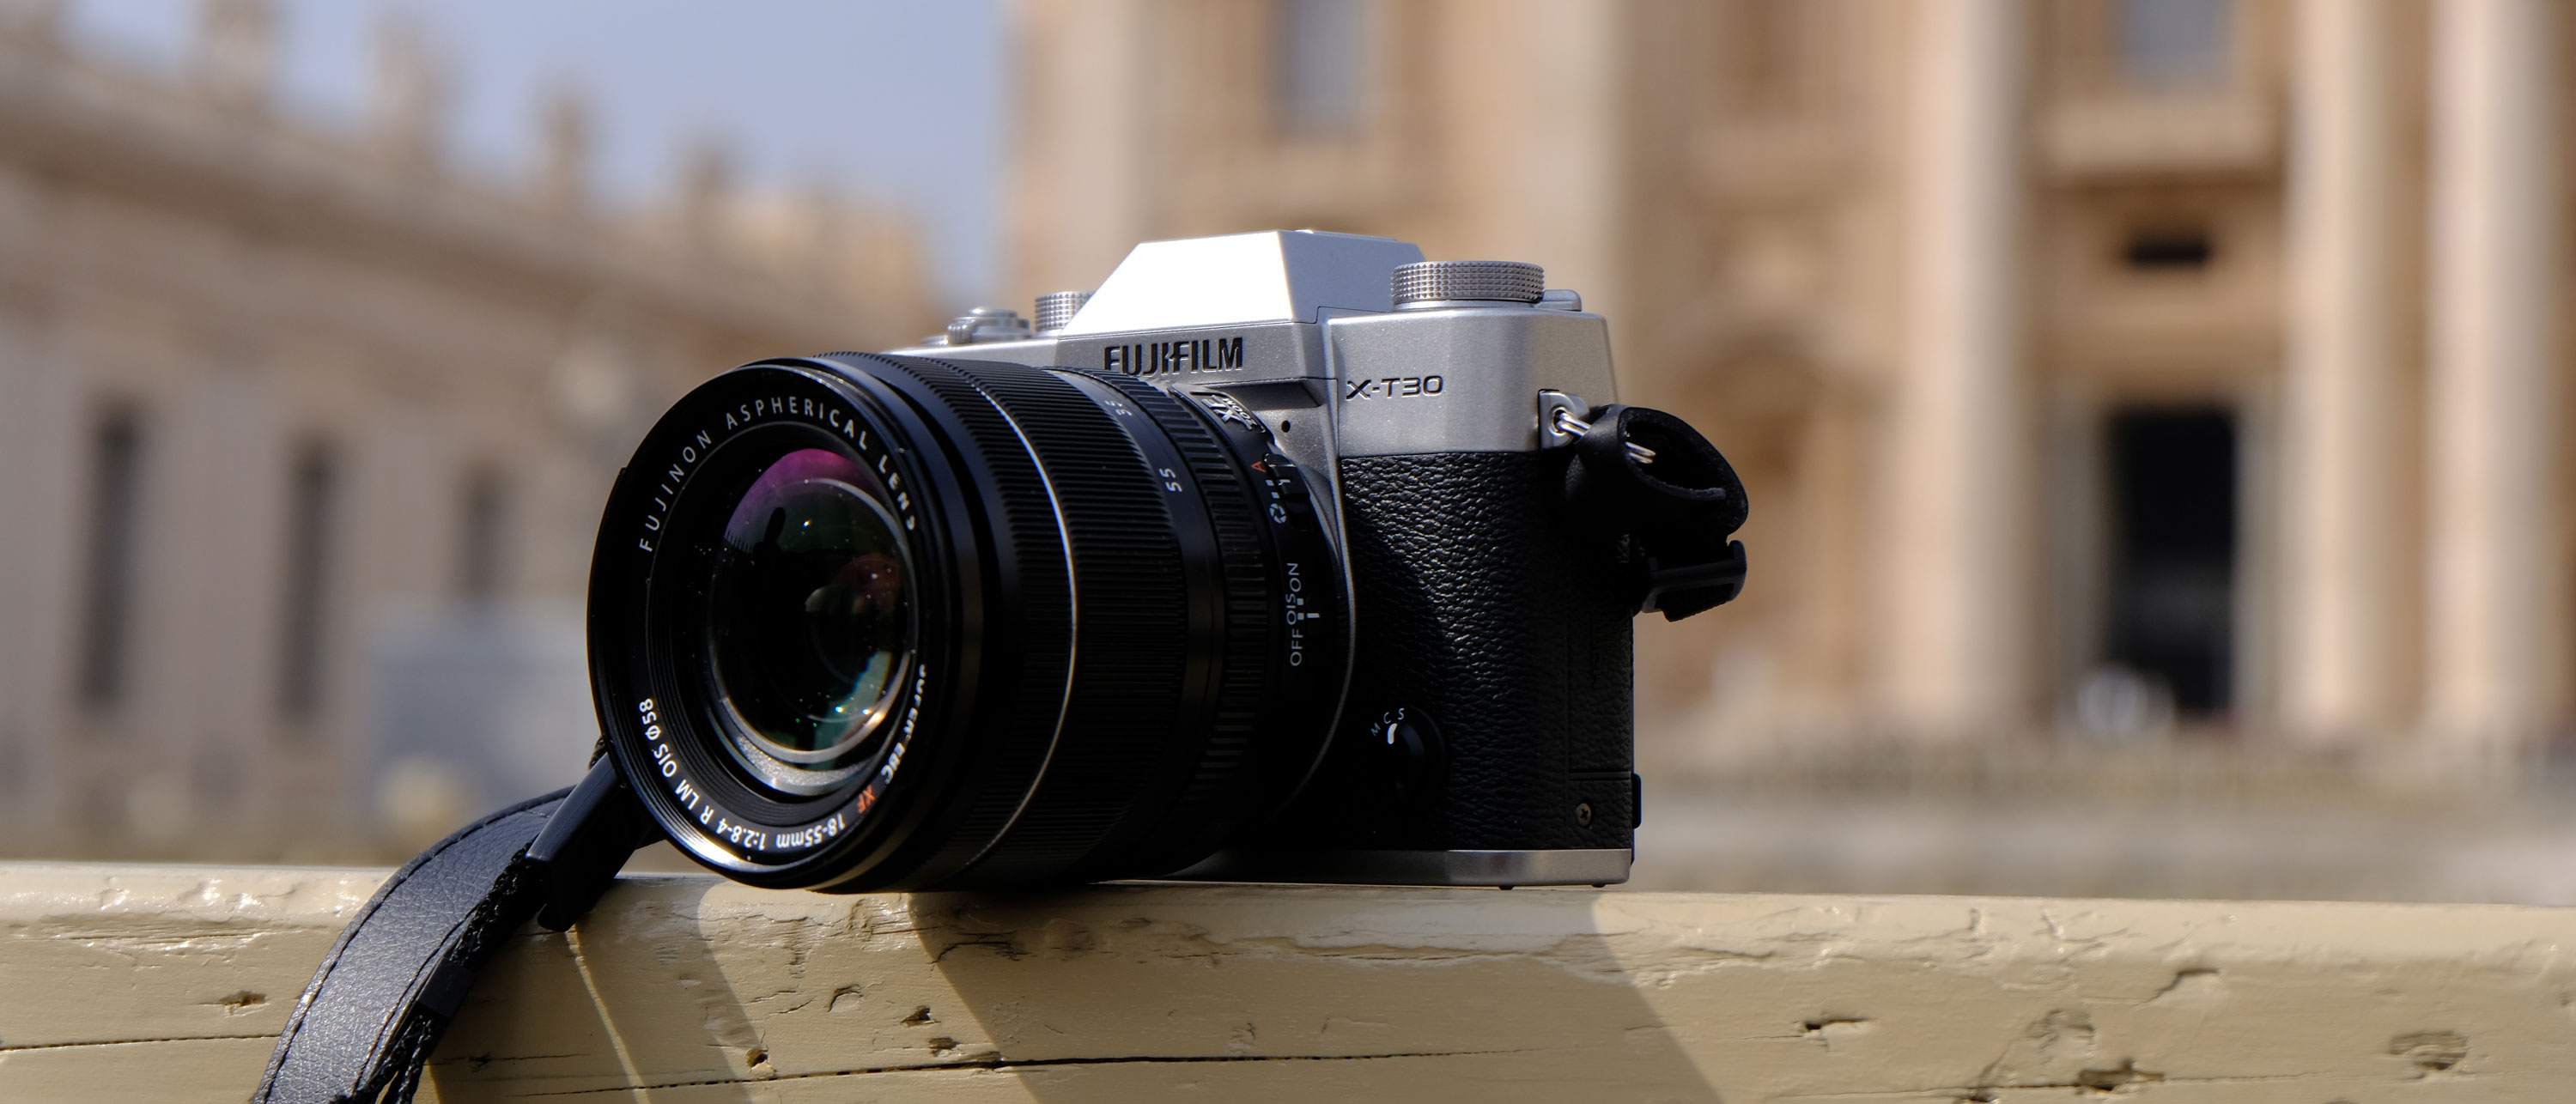 Review of the Fujifilm X-T30  The pint sized over-achiever